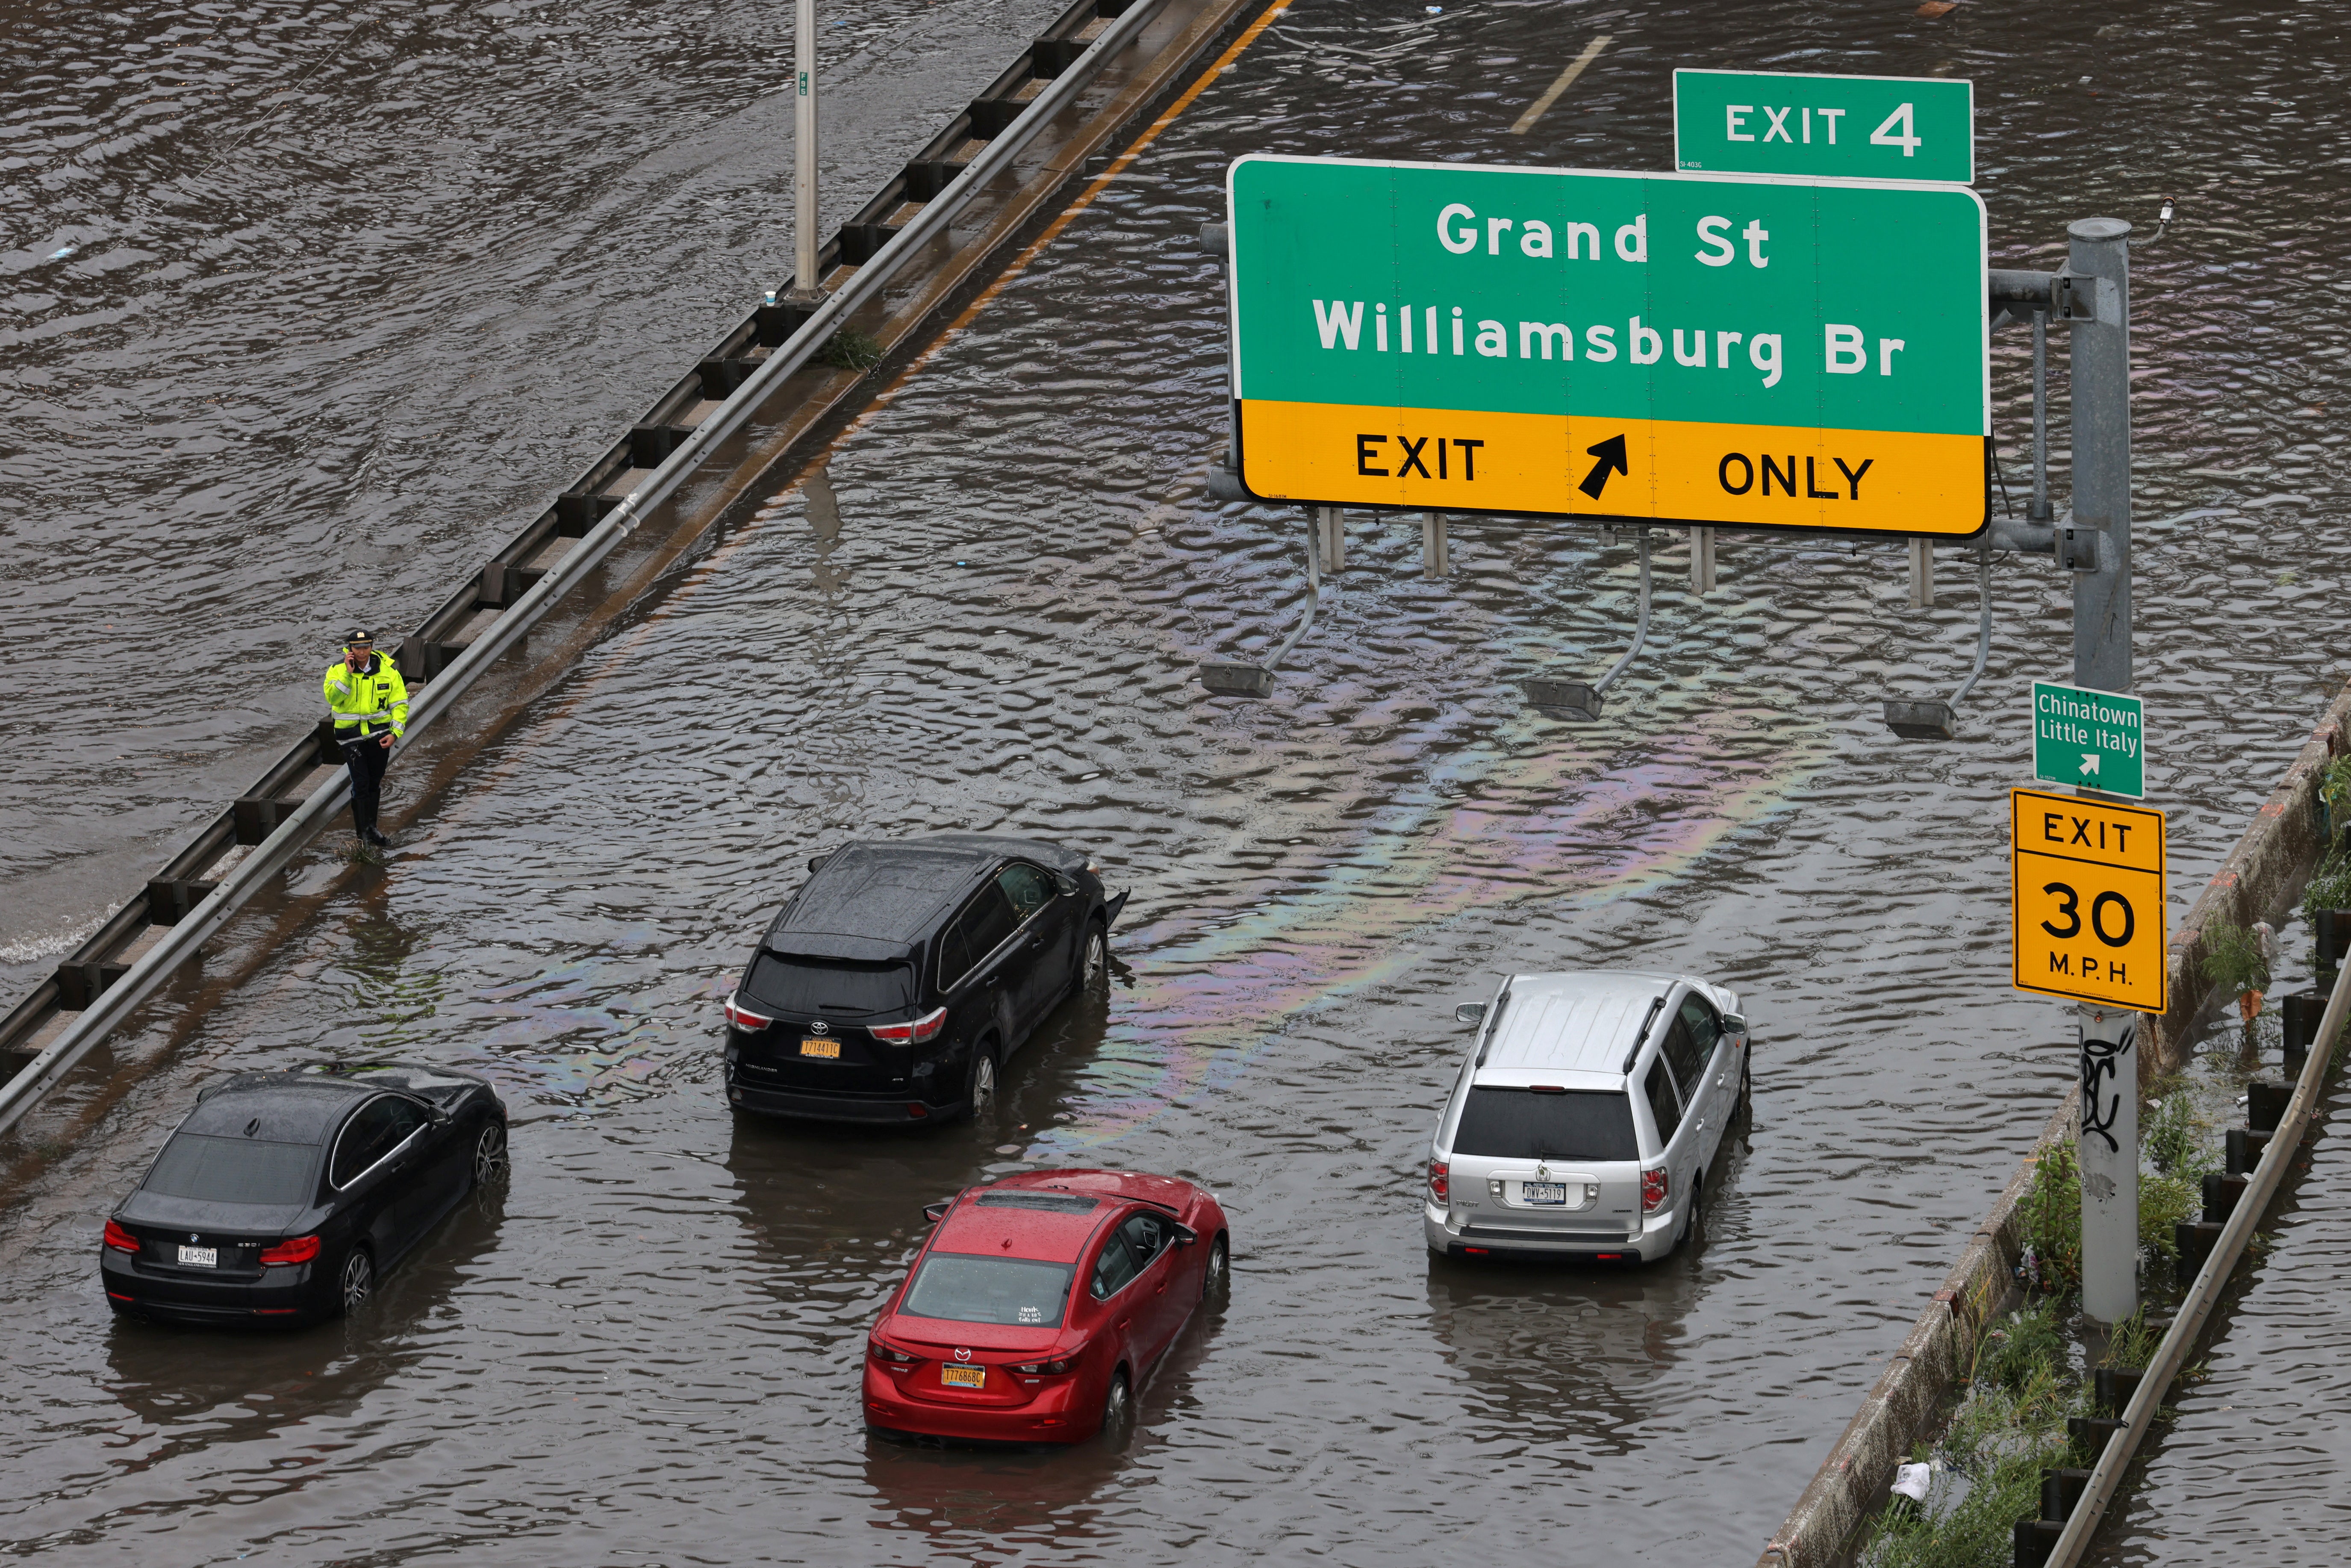 A police officer assists motorists stuck on a flooded street near the Williamsburg Bridge, in New York City on September 29, 2023